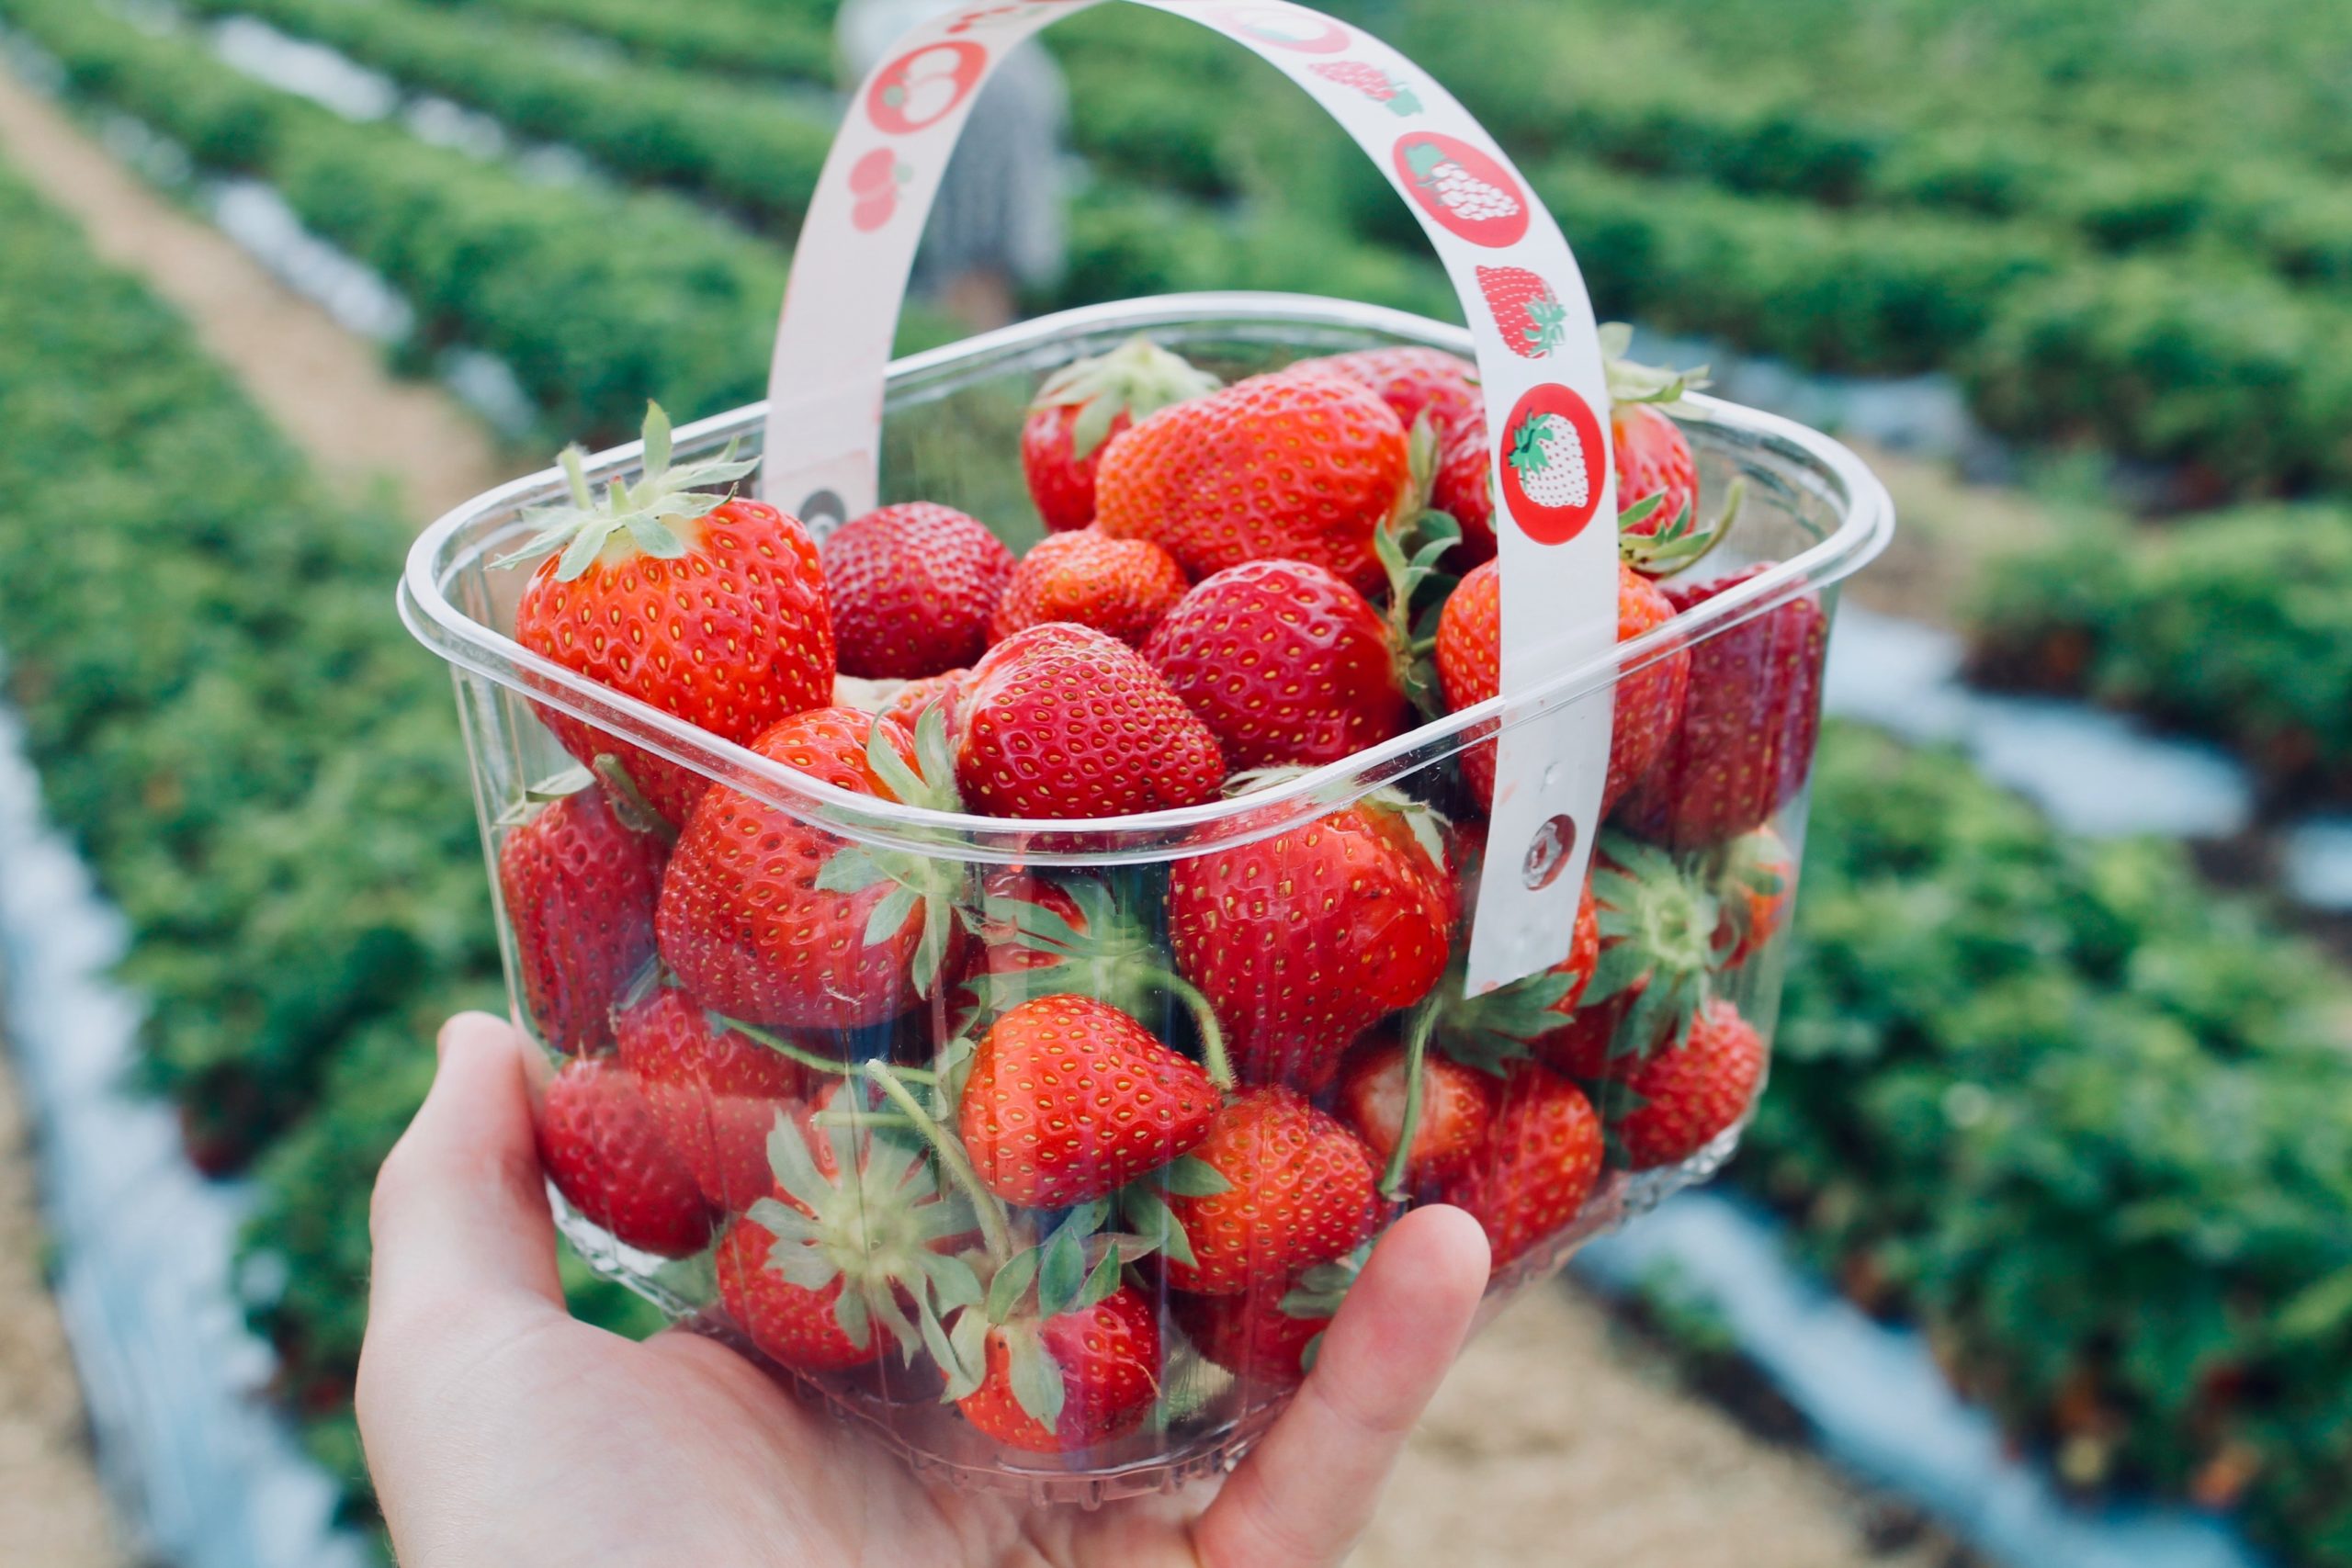 Close-up of a hand holding a container of strawberries on a u-pick strawberry farm